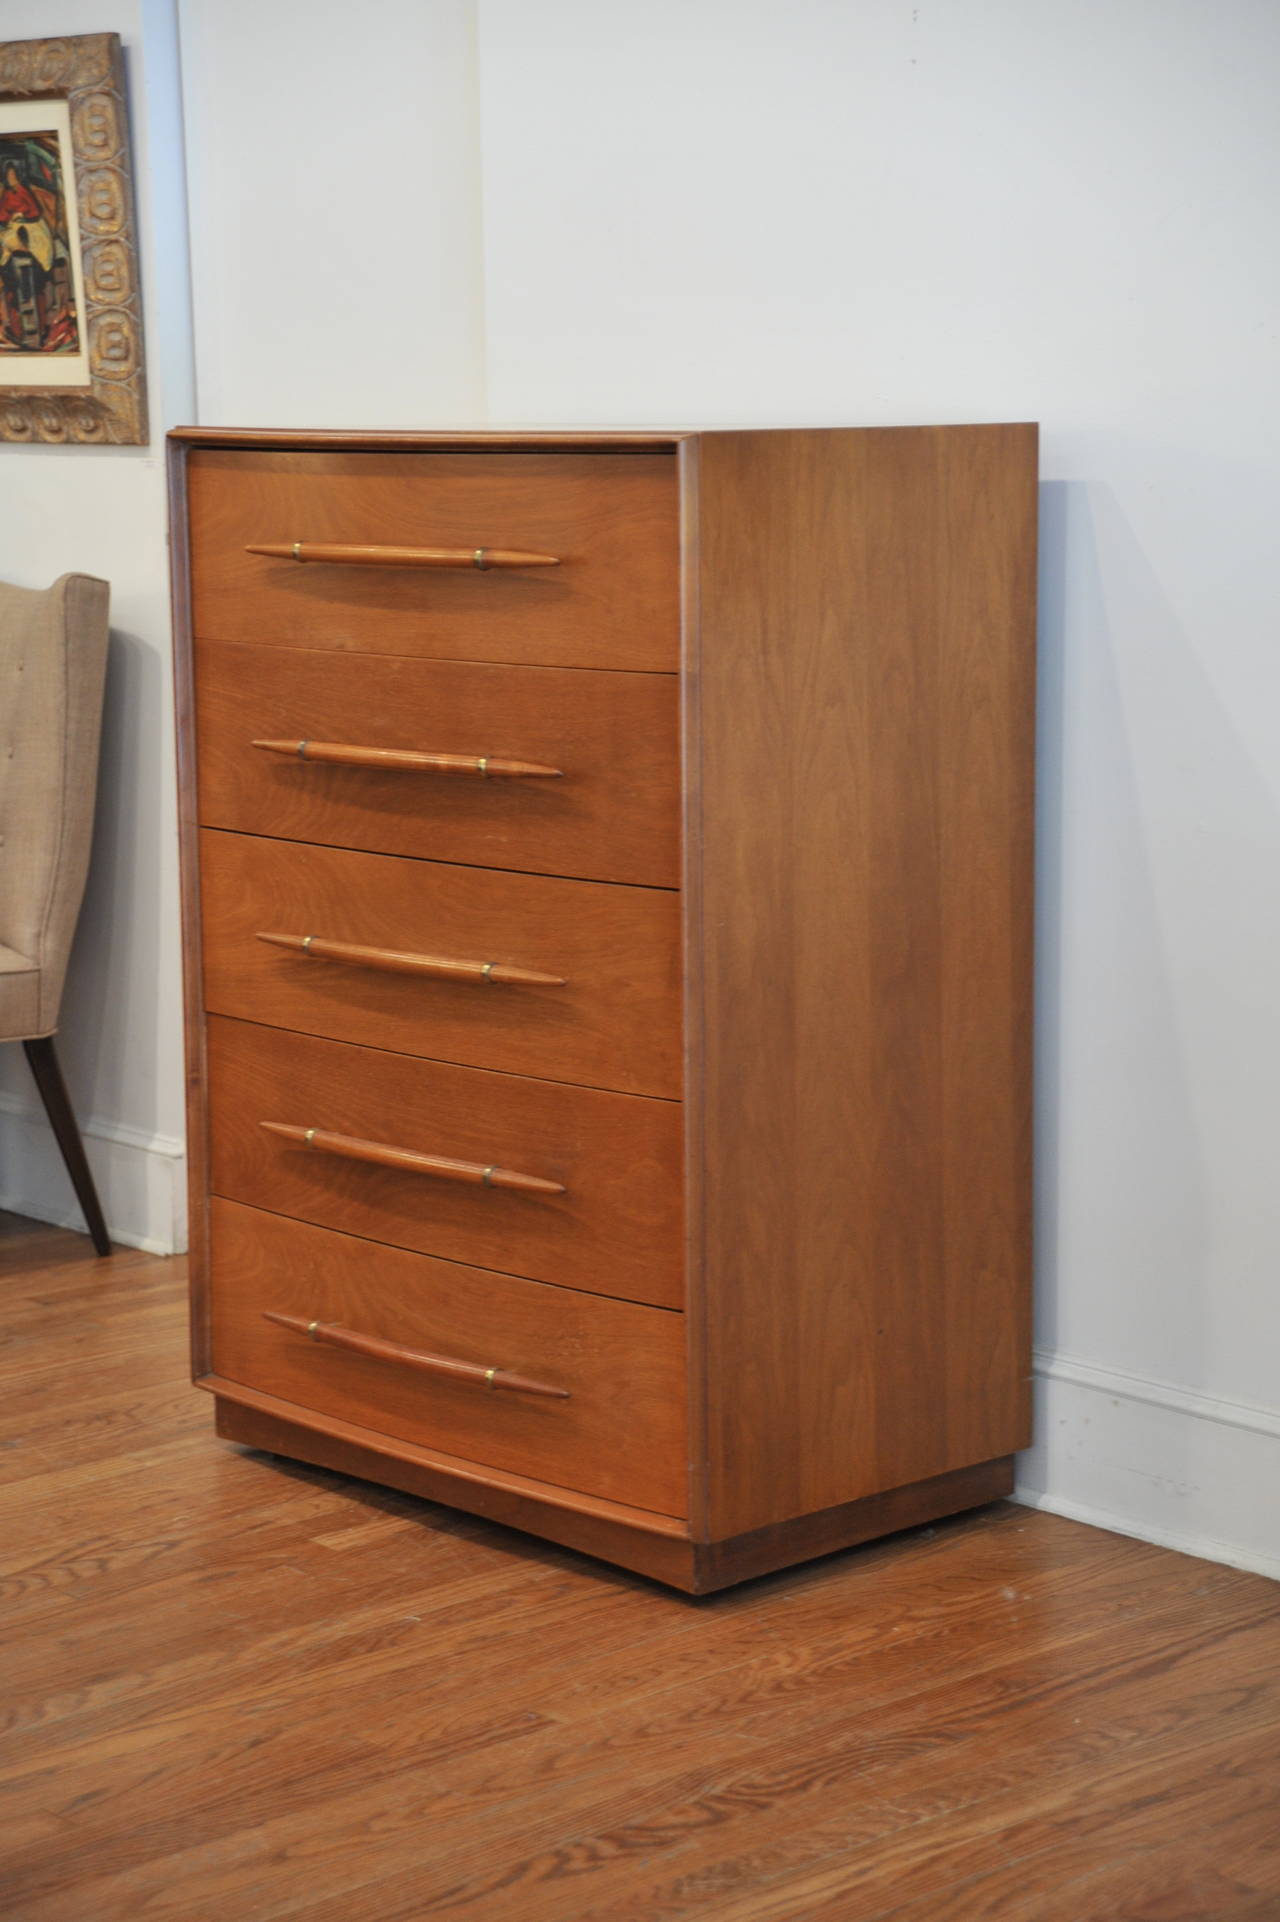 Tall five-drawer dresser designed by T.H. Robsjohn-Gibbings for Widdicomb. The wood has a warm tone. The drawers have unusual sleek pulls with brass detail. These pulls are rarely seen. Abundant storage with top divided drawers.